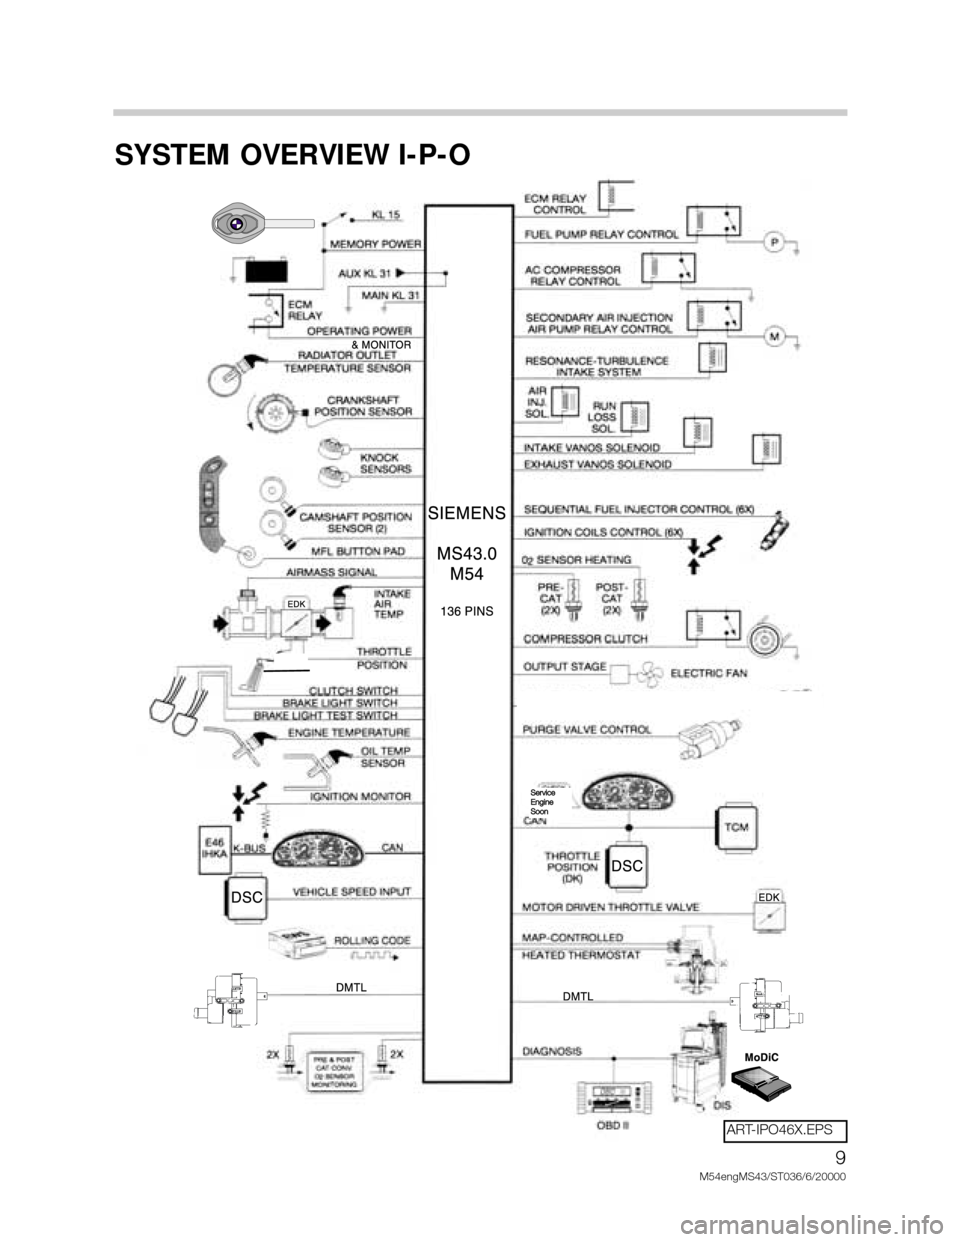 BMW X5 2001 E53 M54 Engine Workshop Manual 9
M54engMS43/ST036/6/20000
SYSTEM OVERVIEW I-P-O
Service 
Engine
Soon
ART-IPO46X.EPS 